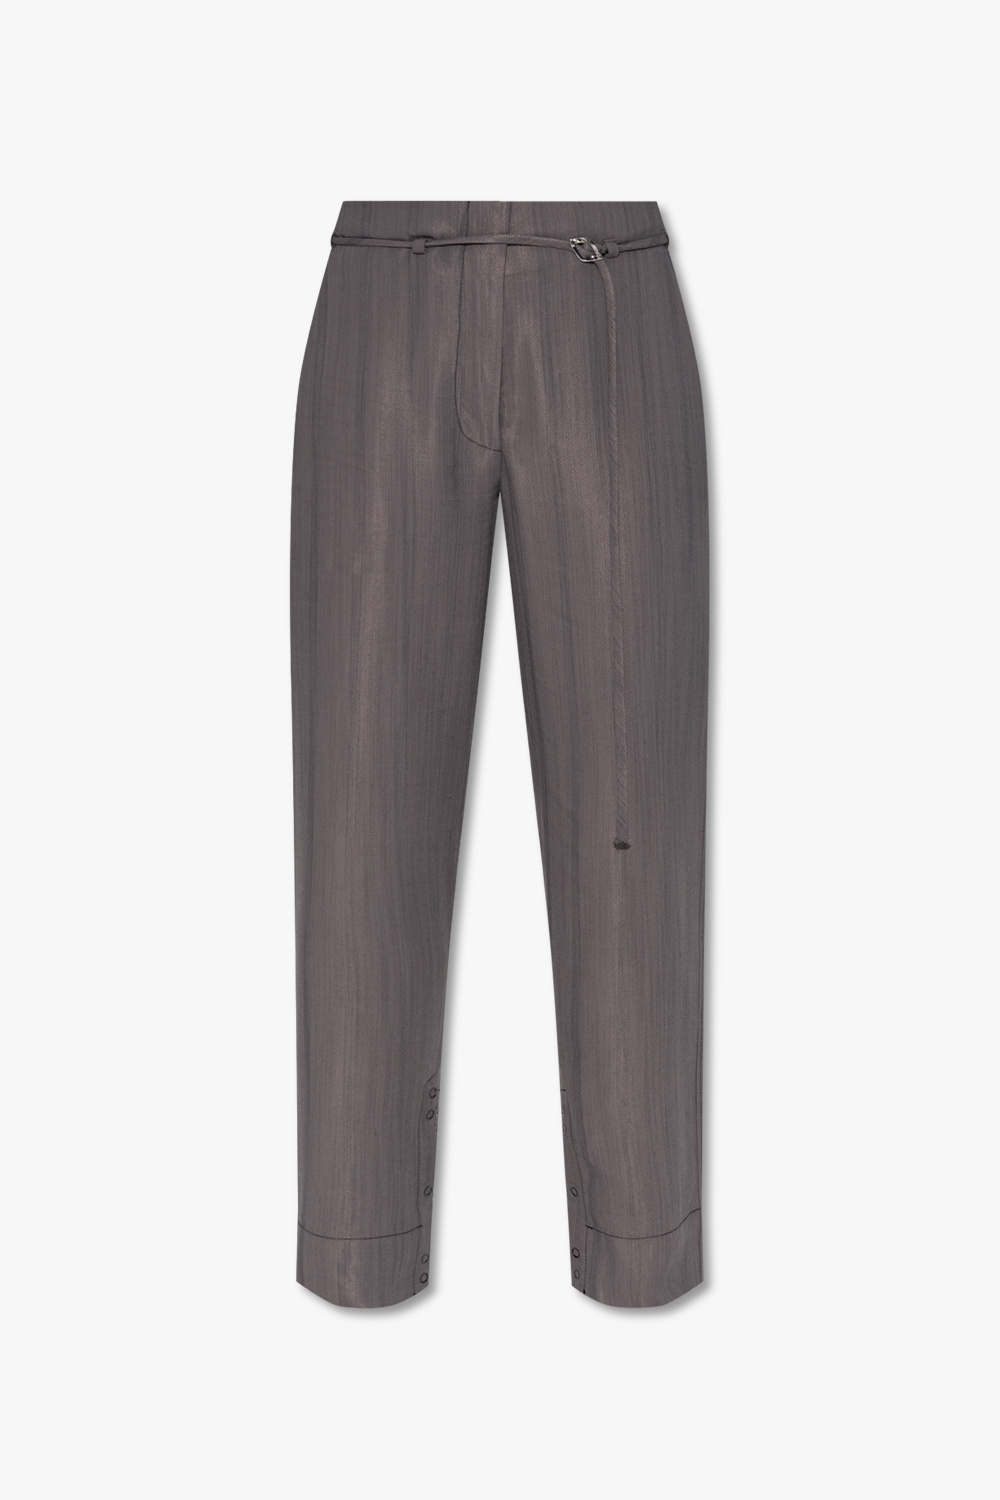 Unique21 Petite high waisted tailored pants in grey (part of a set)